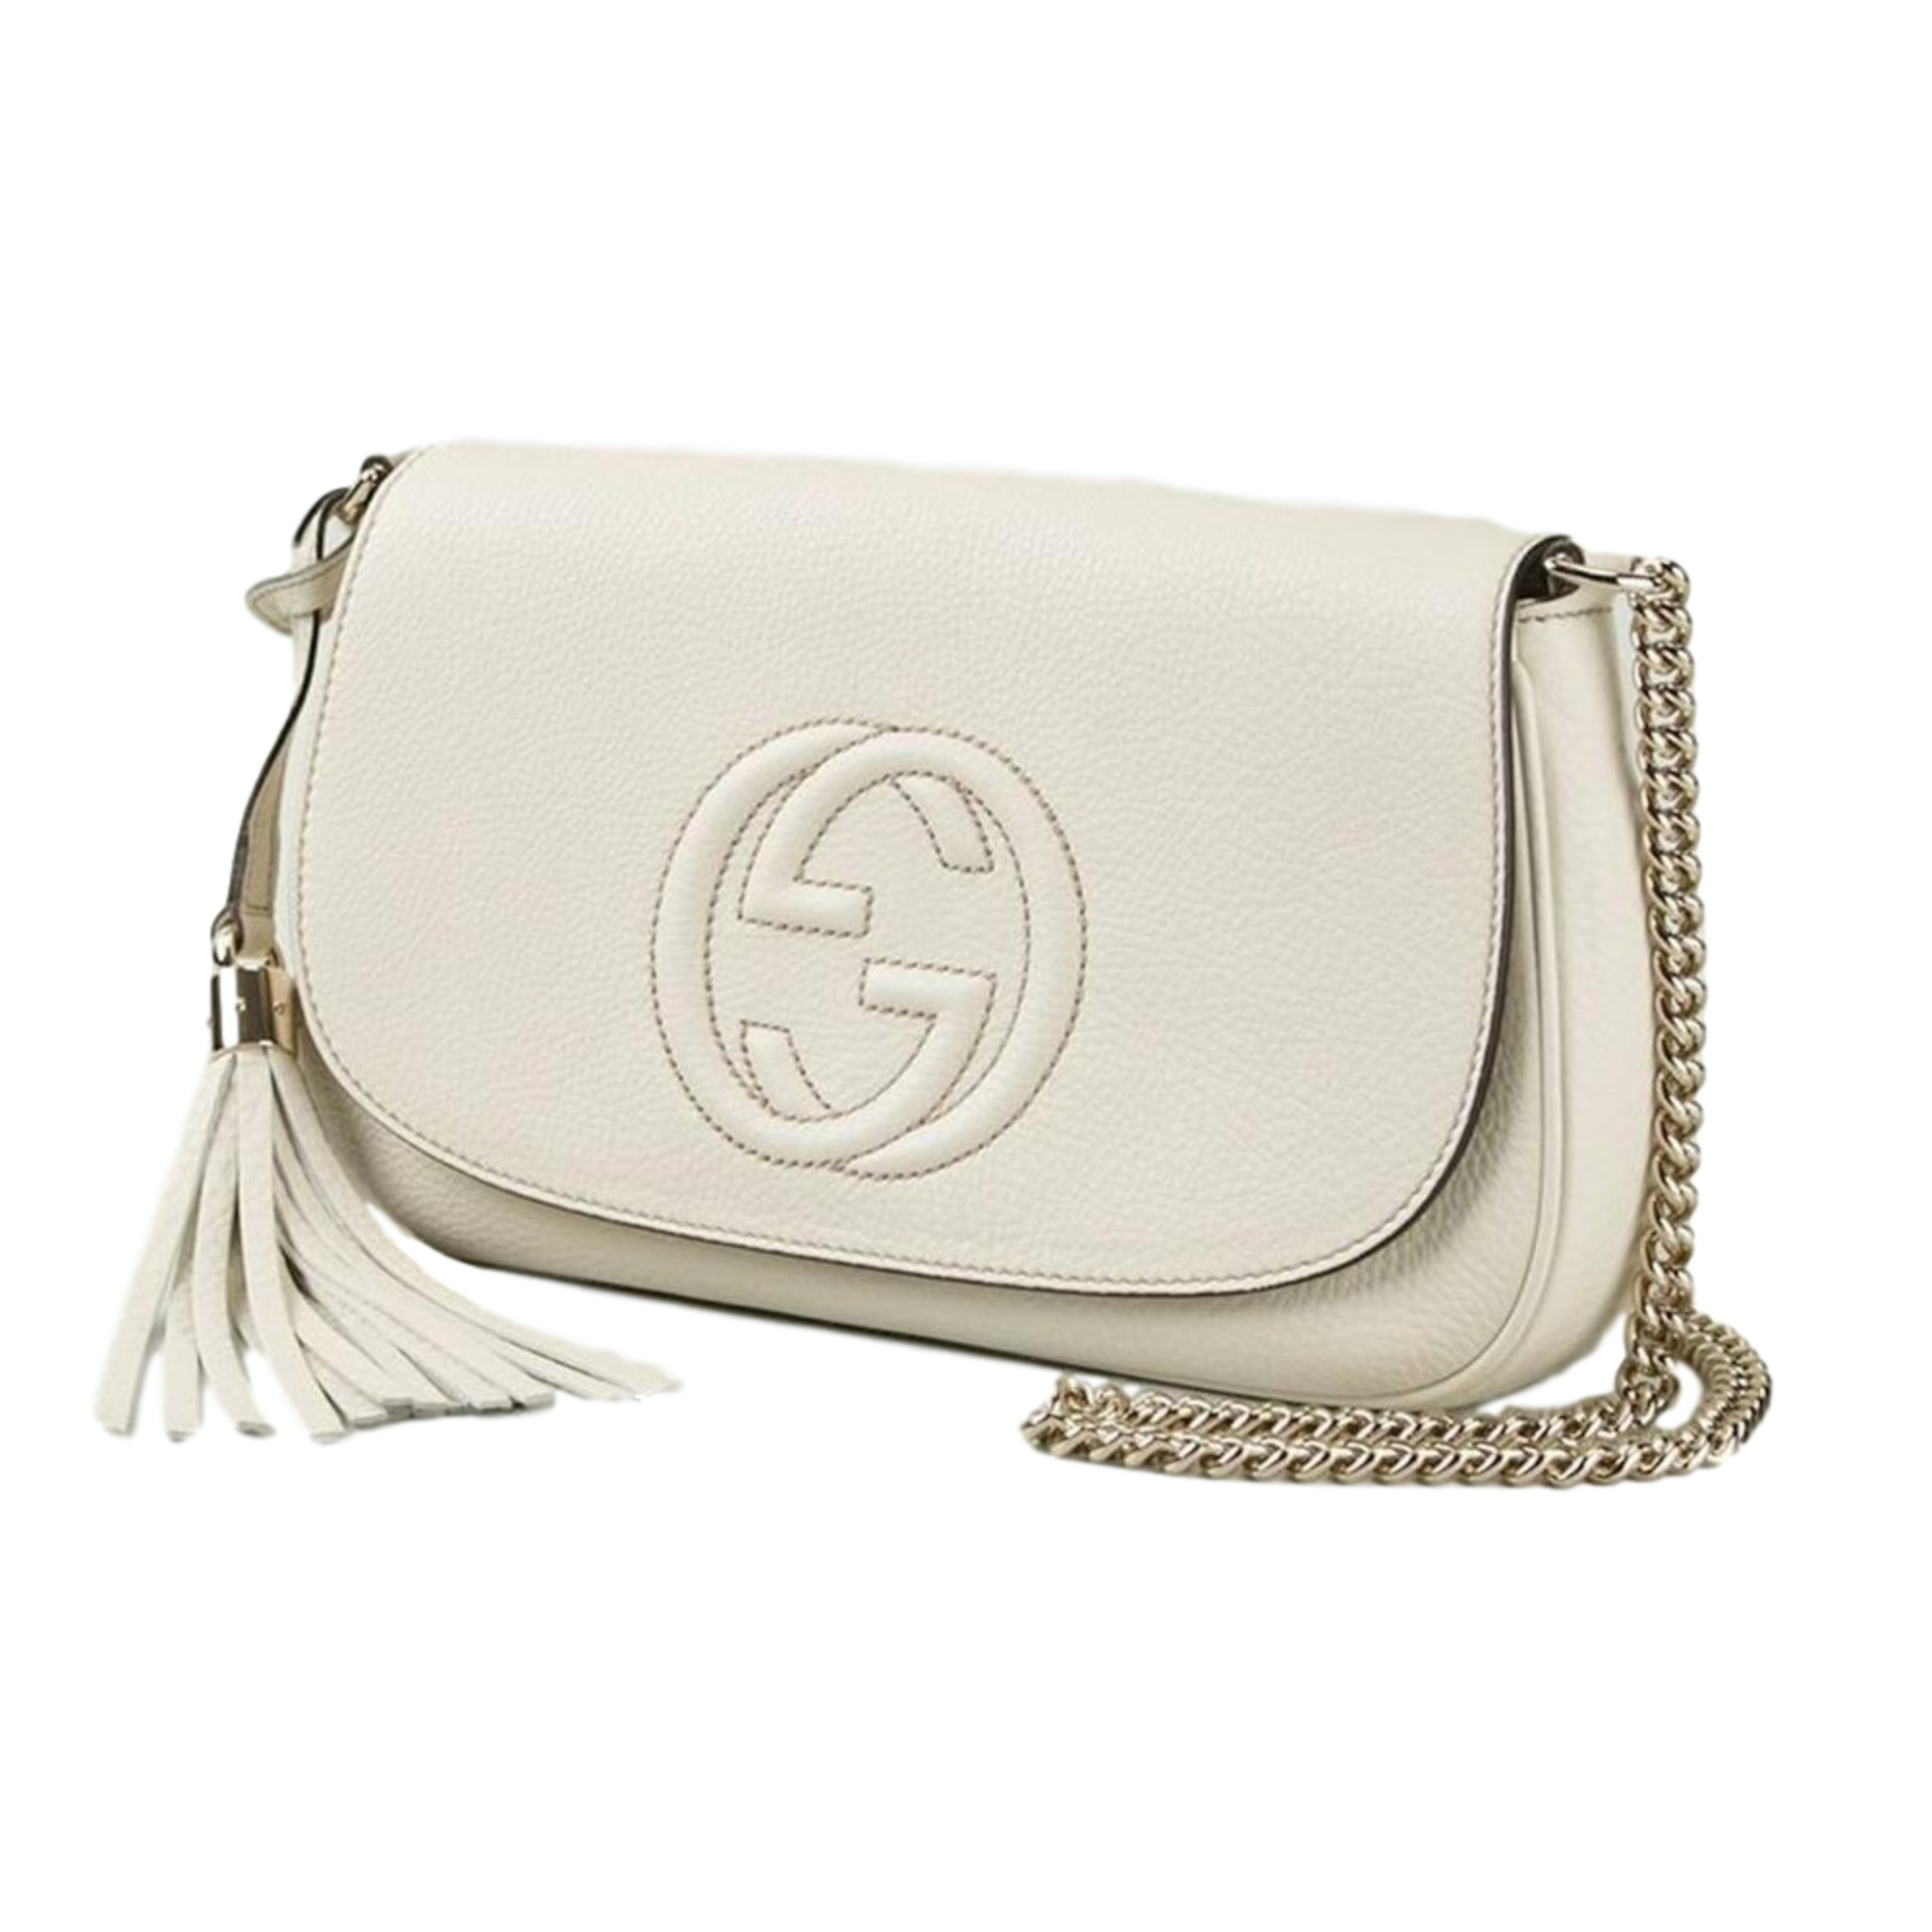 Gucci Soho Disco Ivory Signature Collection w/ Light Fine Gold Chain 536224 at_Queen_Bee_of_Beverly_Hills